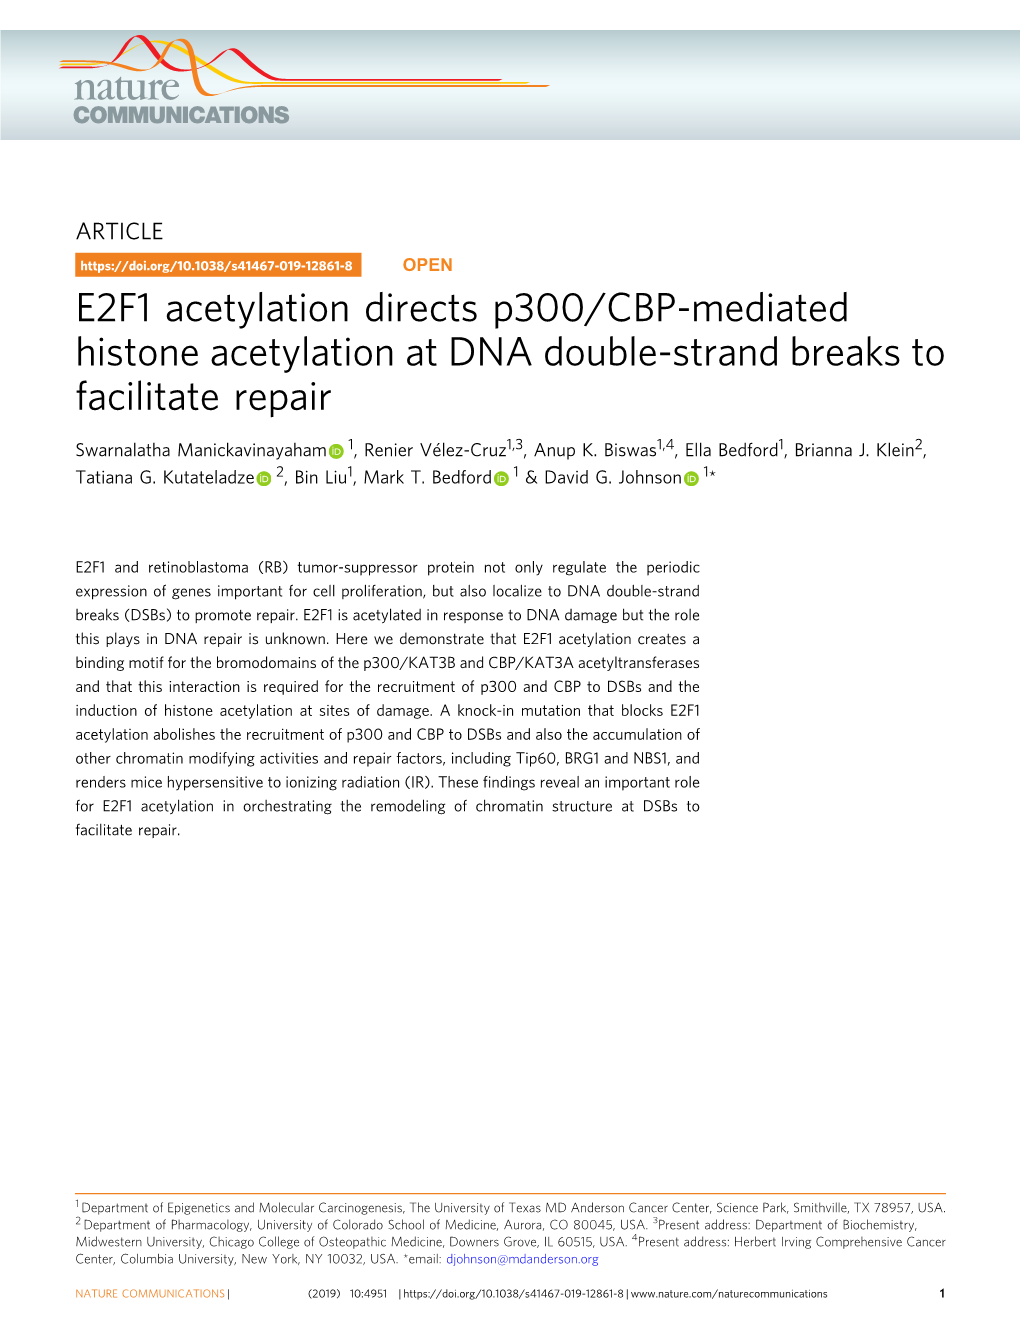 E2F1 Acetylation Directs P300/CBP-Mediated Histone Acetylation at DNA Double-Strand Breaks to Facilitate Repair